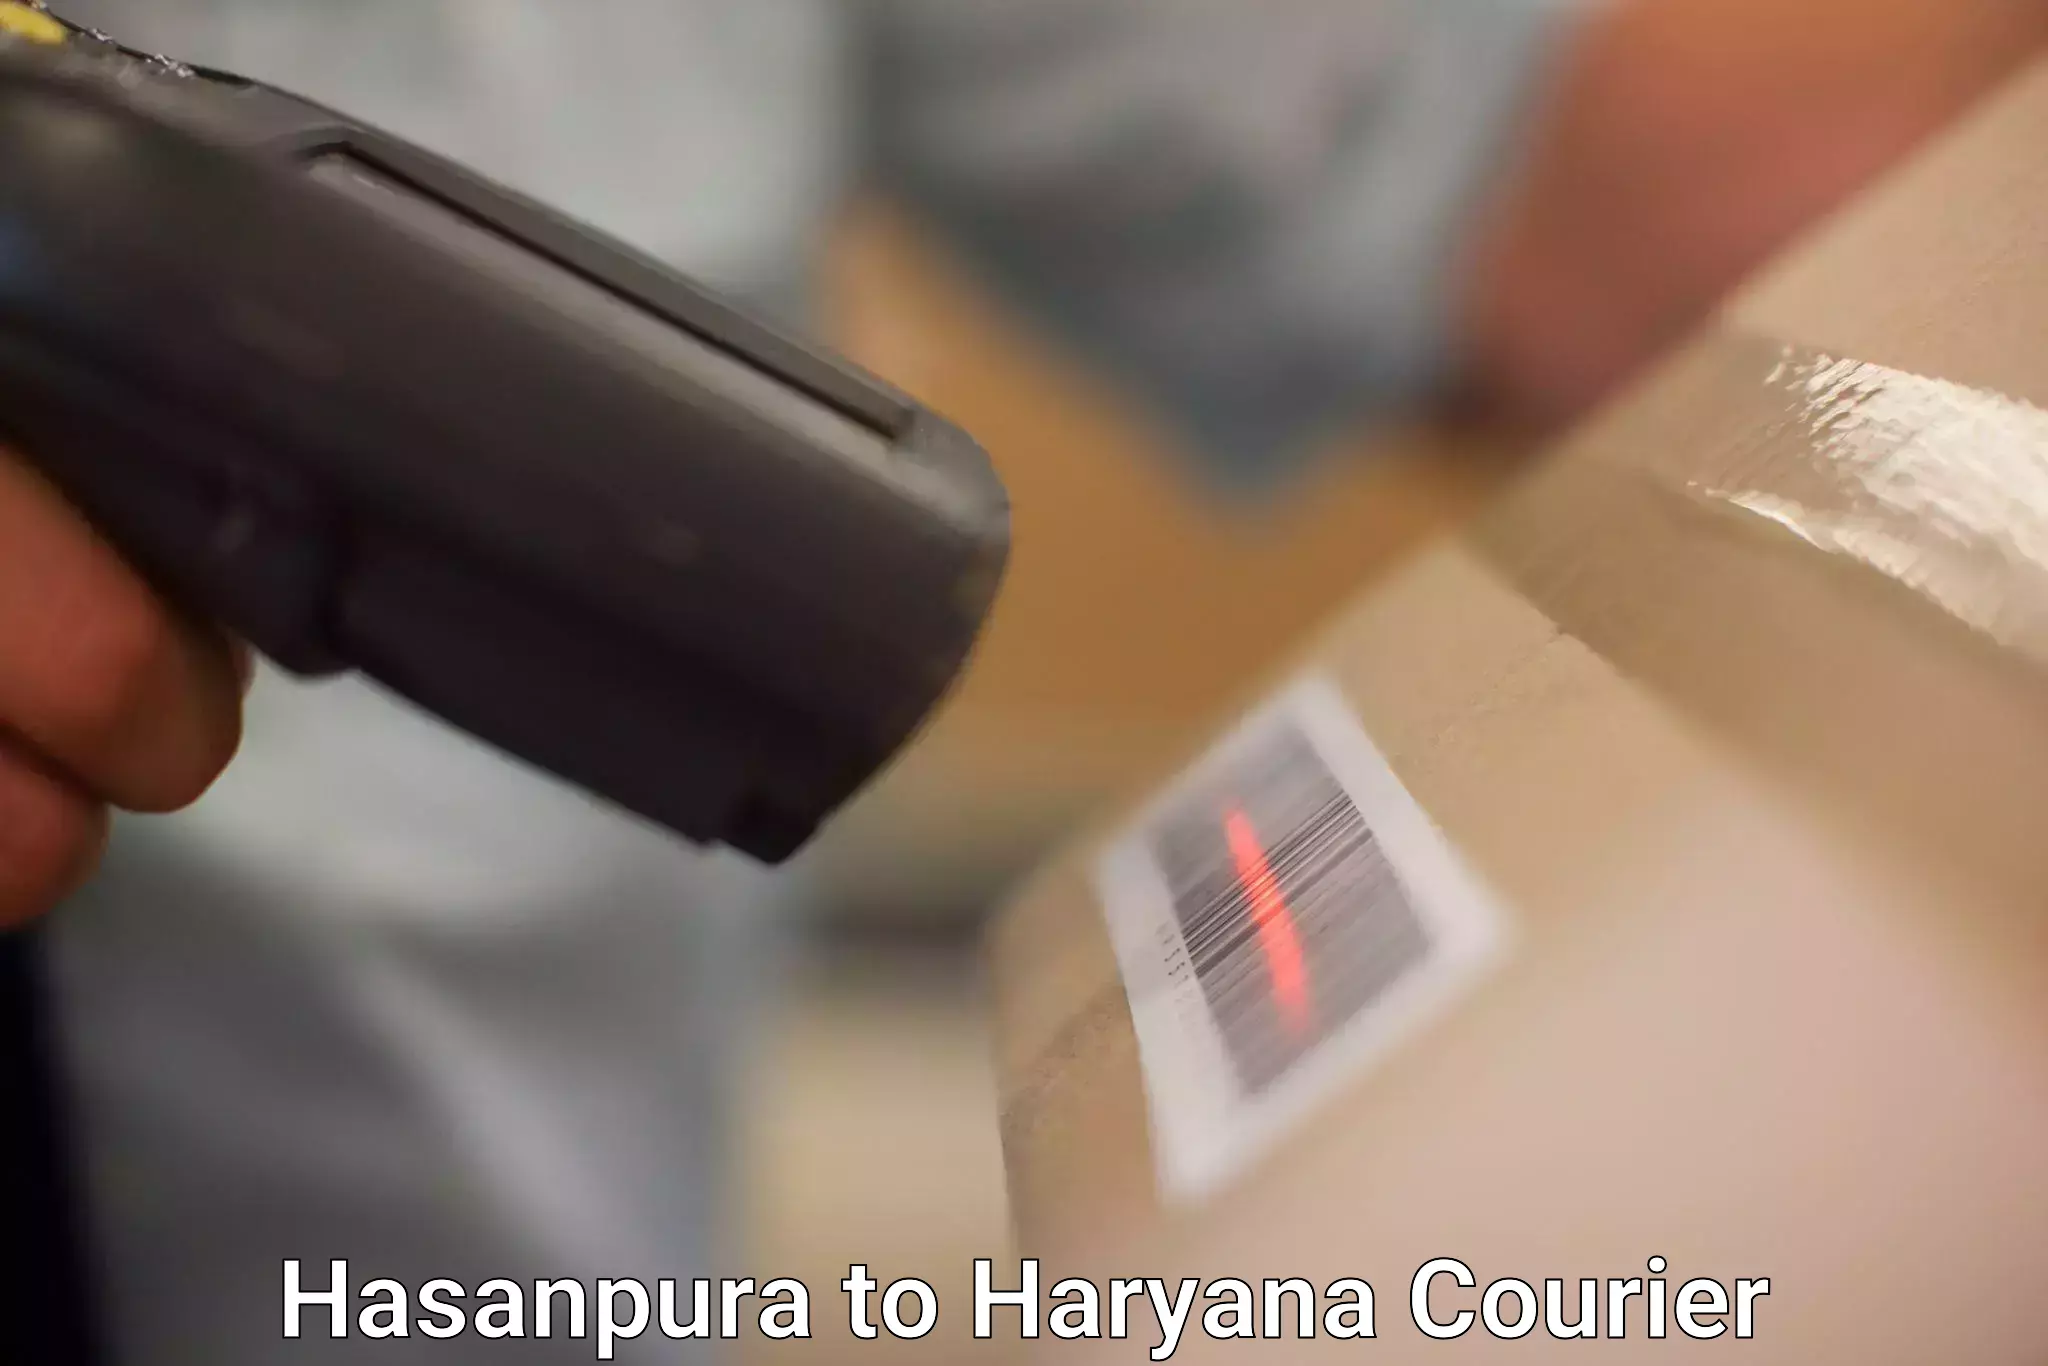 Multi-service courier options Hasanpura to Panipat